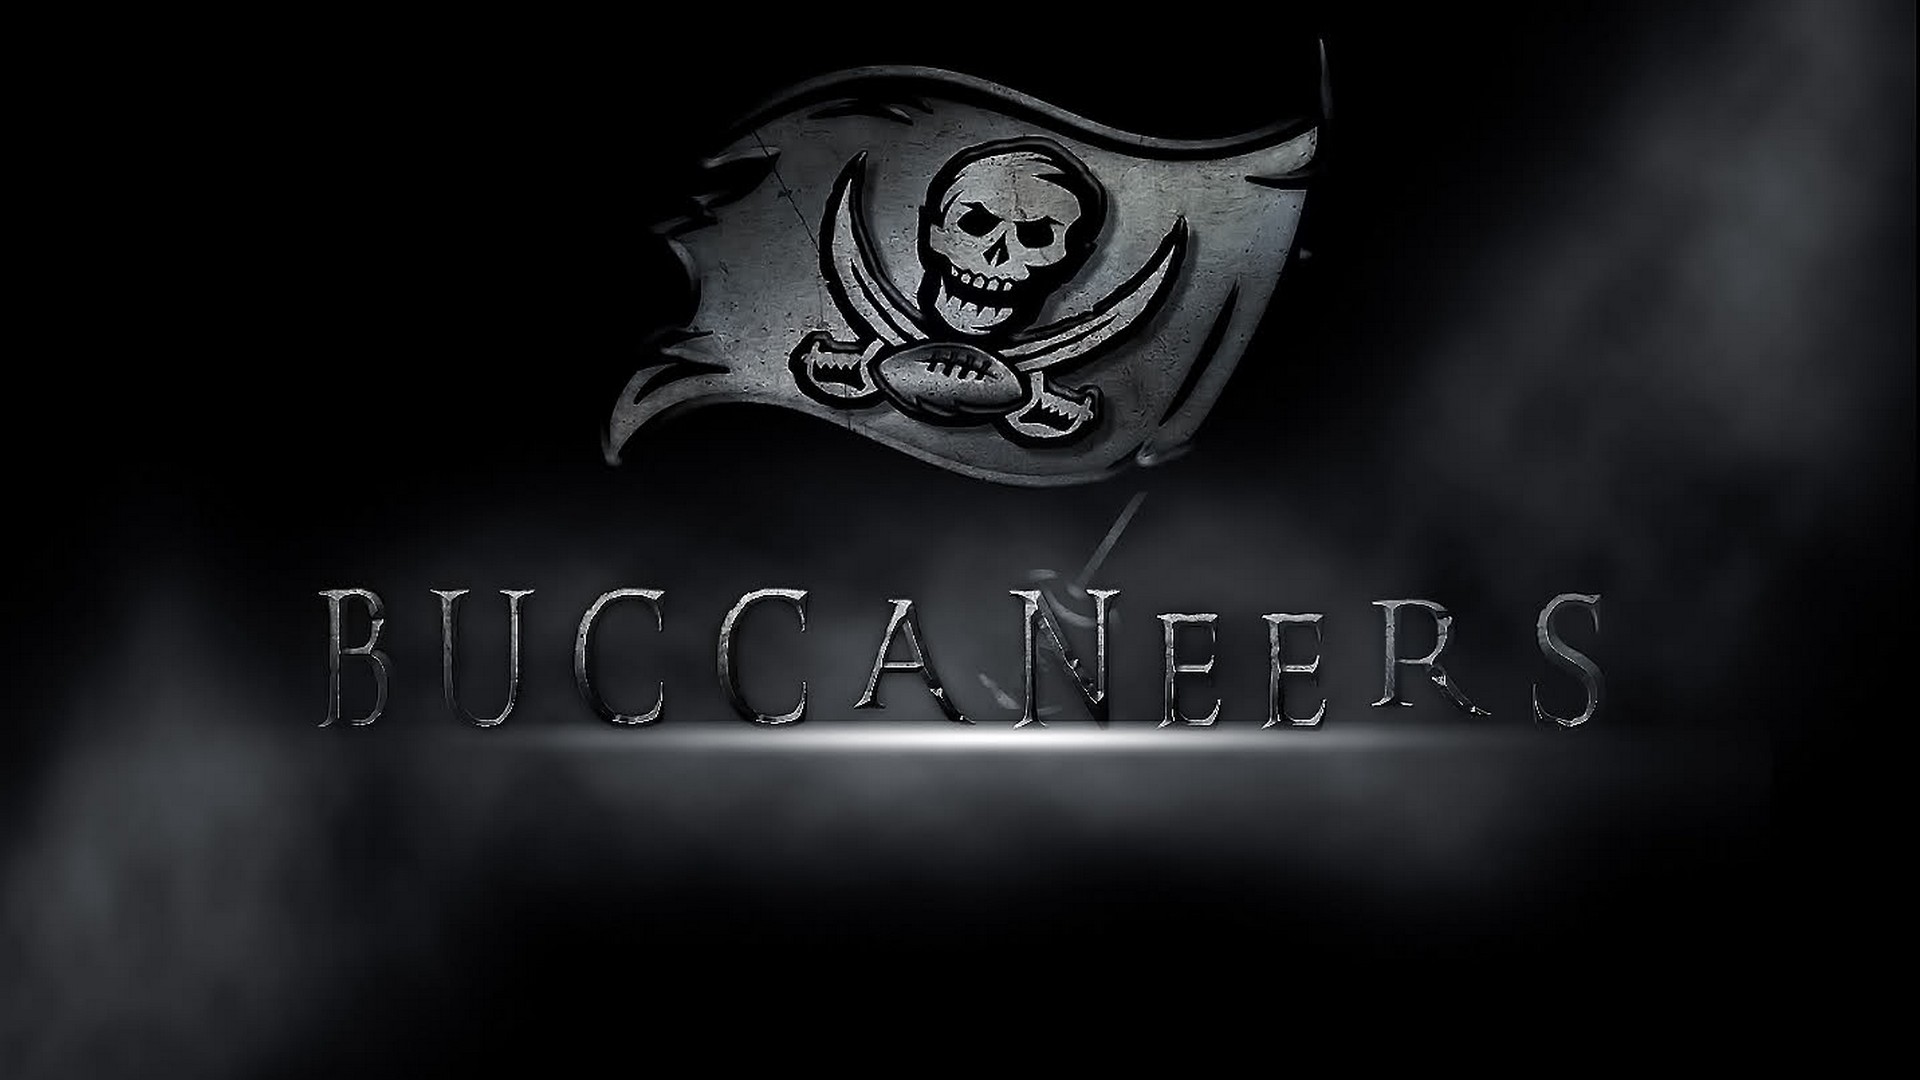 Buccaneers Wallpaper HD With high-resolution 1920X1080 pixel. You can use this wallpaper for your Mac or Windows Desktop Background, iPhone, Android or Tablet and another Smartphone device